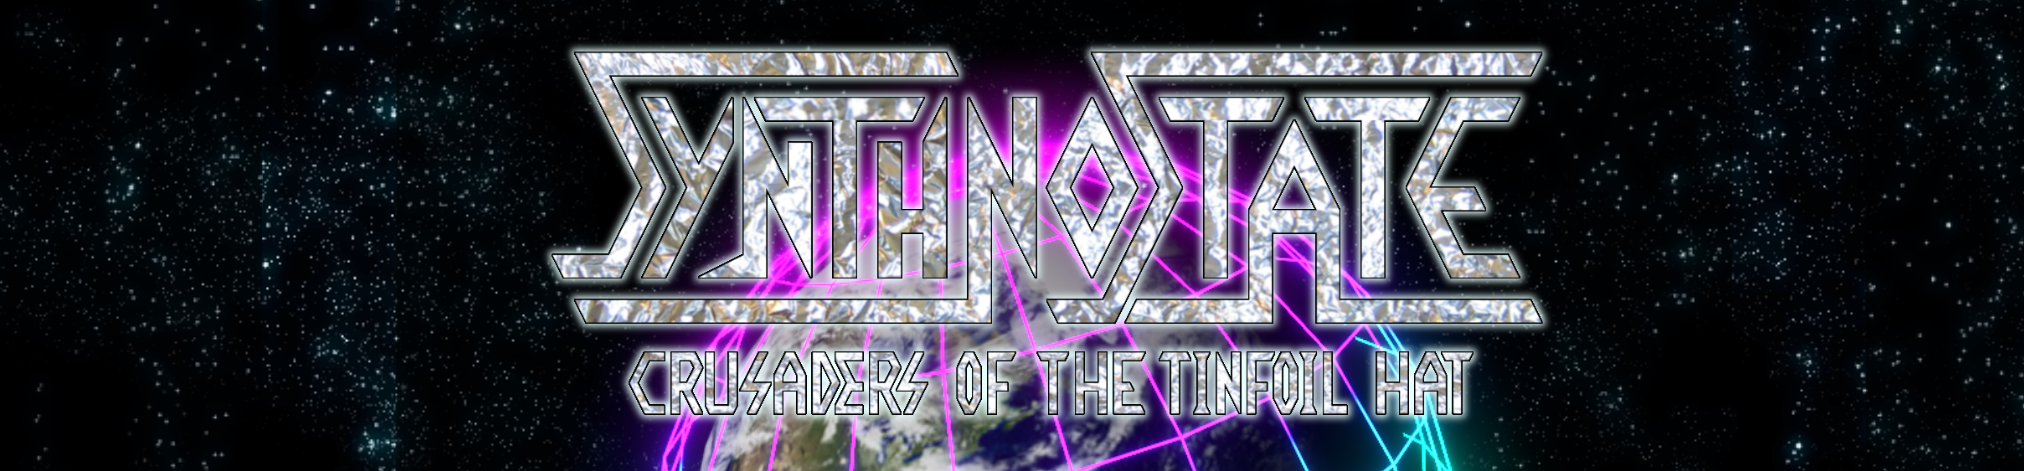 Synthnostate: Crusaders of the Tinfoil Hat [DEMO]